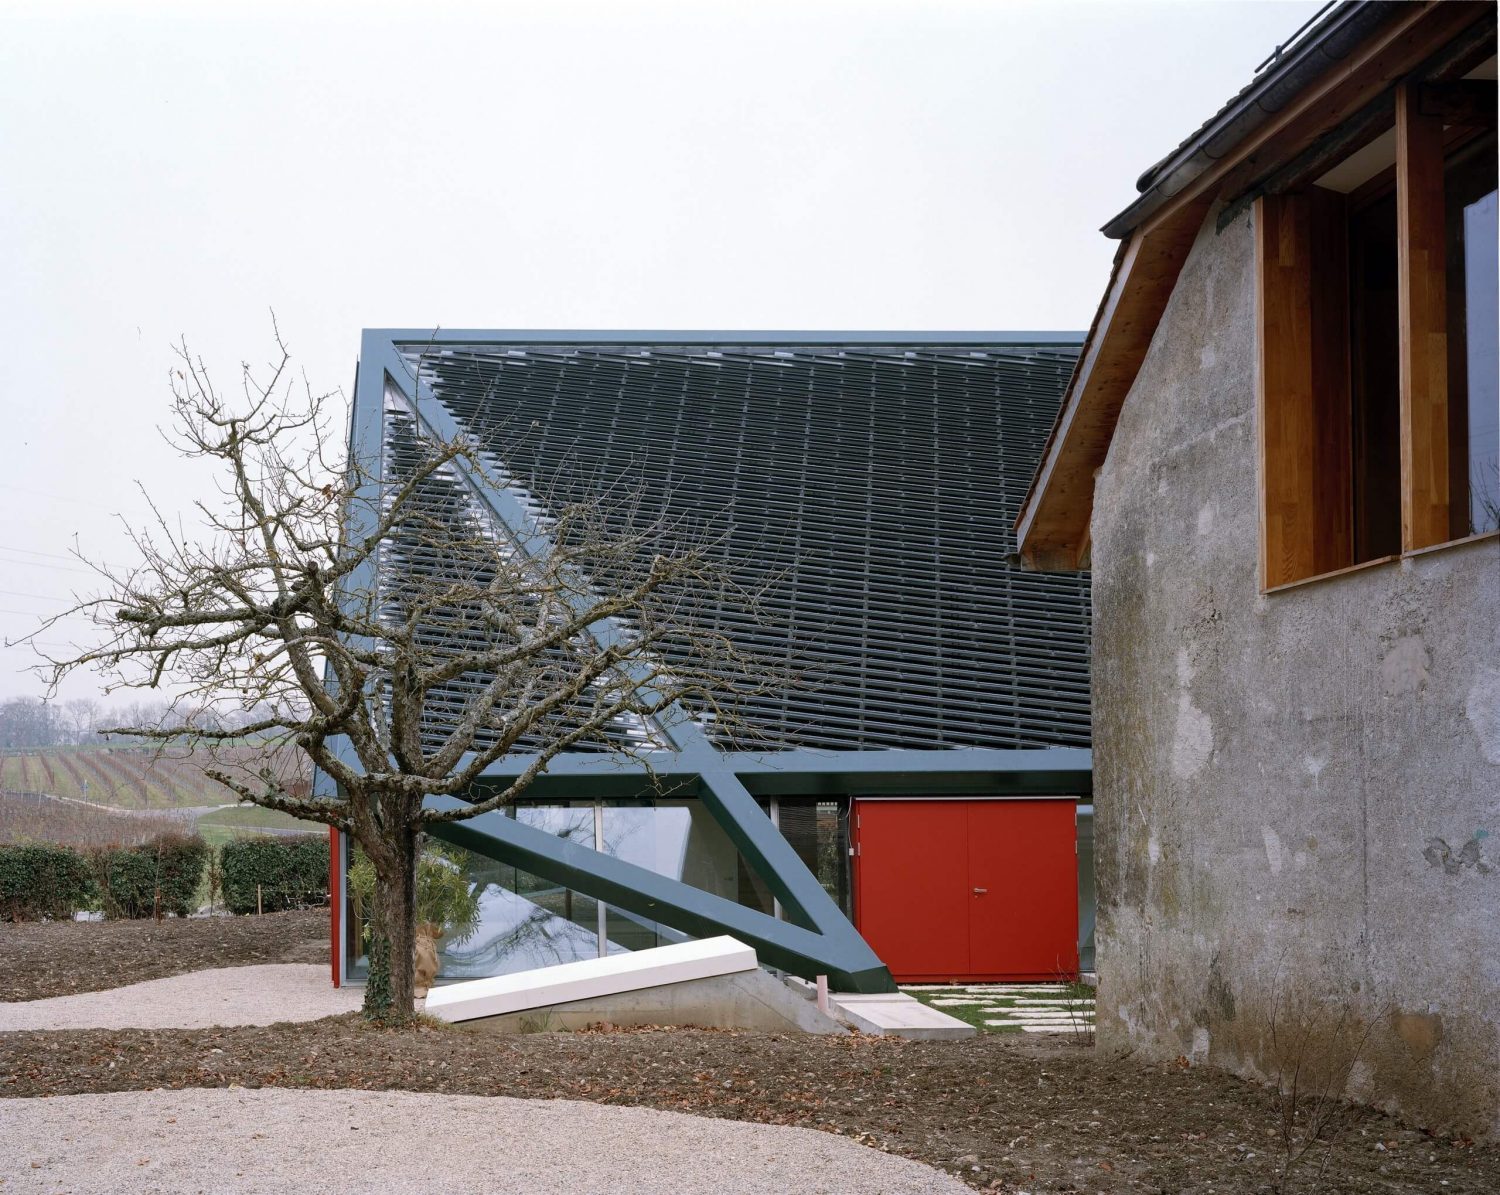 Two Houses in Chigny by dieterdietz.org